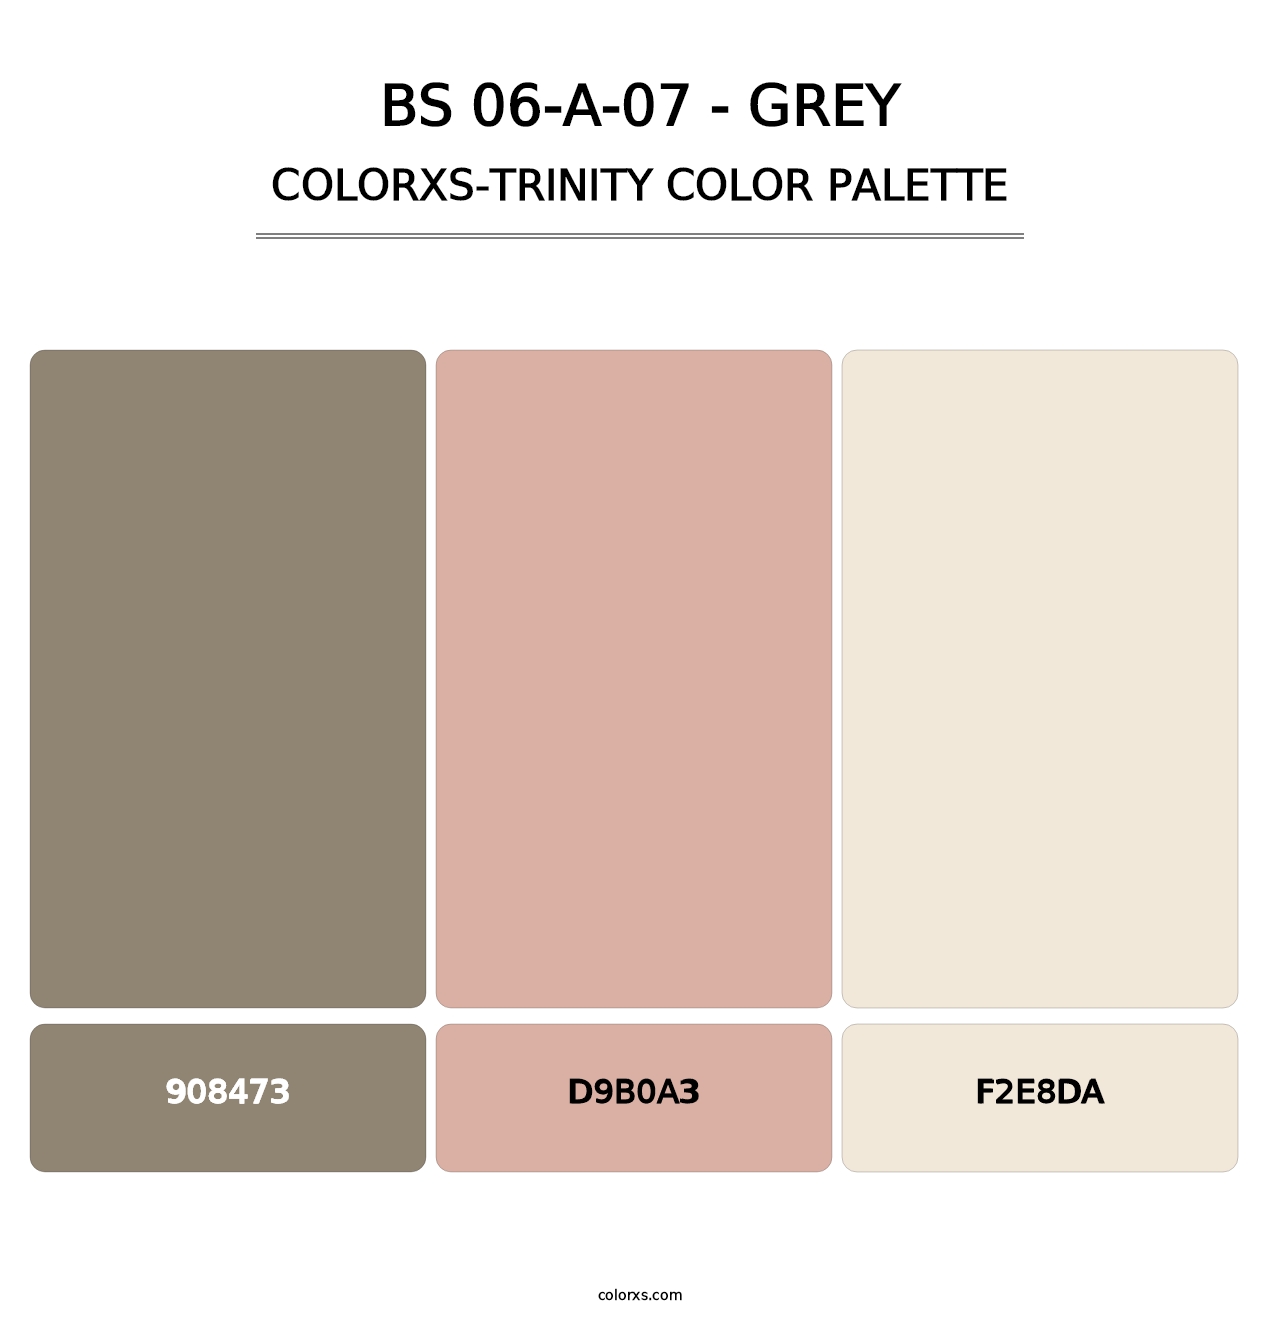 BS 06-A-07 - Grey - Colorxs Trinity Palette